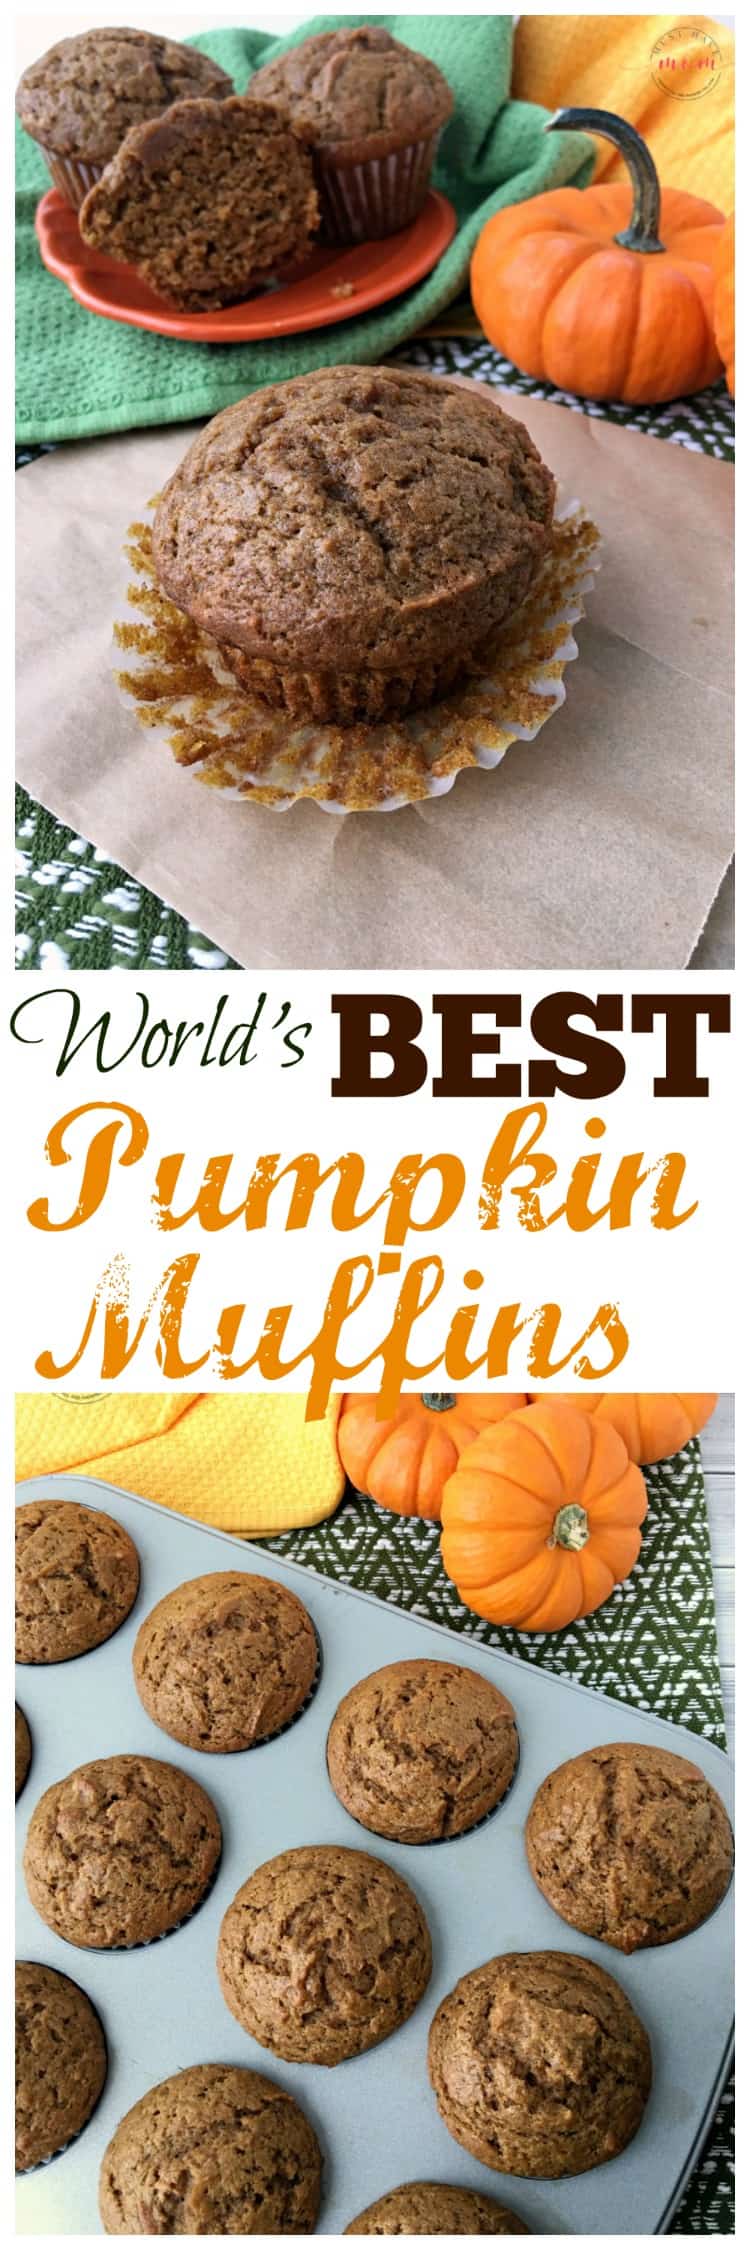 Try these healthy pumpkin muffins made with coconut oil and spices! One of my favorite pumpkin recipes in Fall!